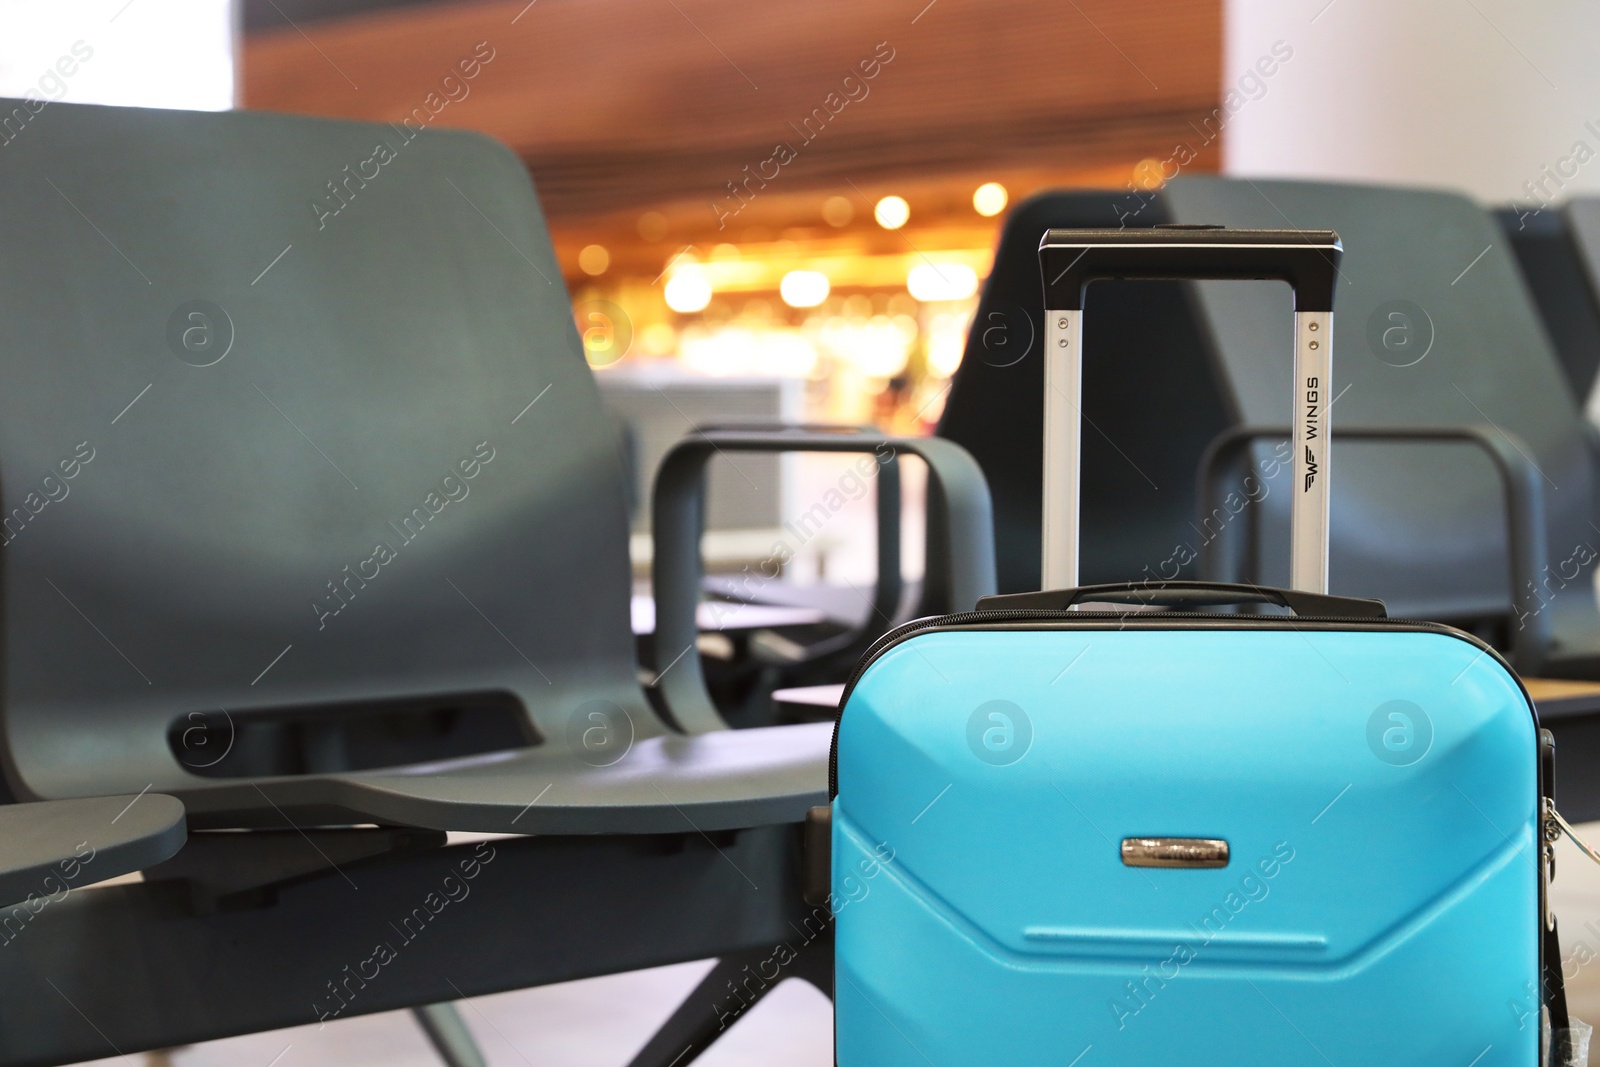 Photo of ISTANBUL, TURKEY - AUGUST 6, 2019: Bright modern suitcase near bench in airport